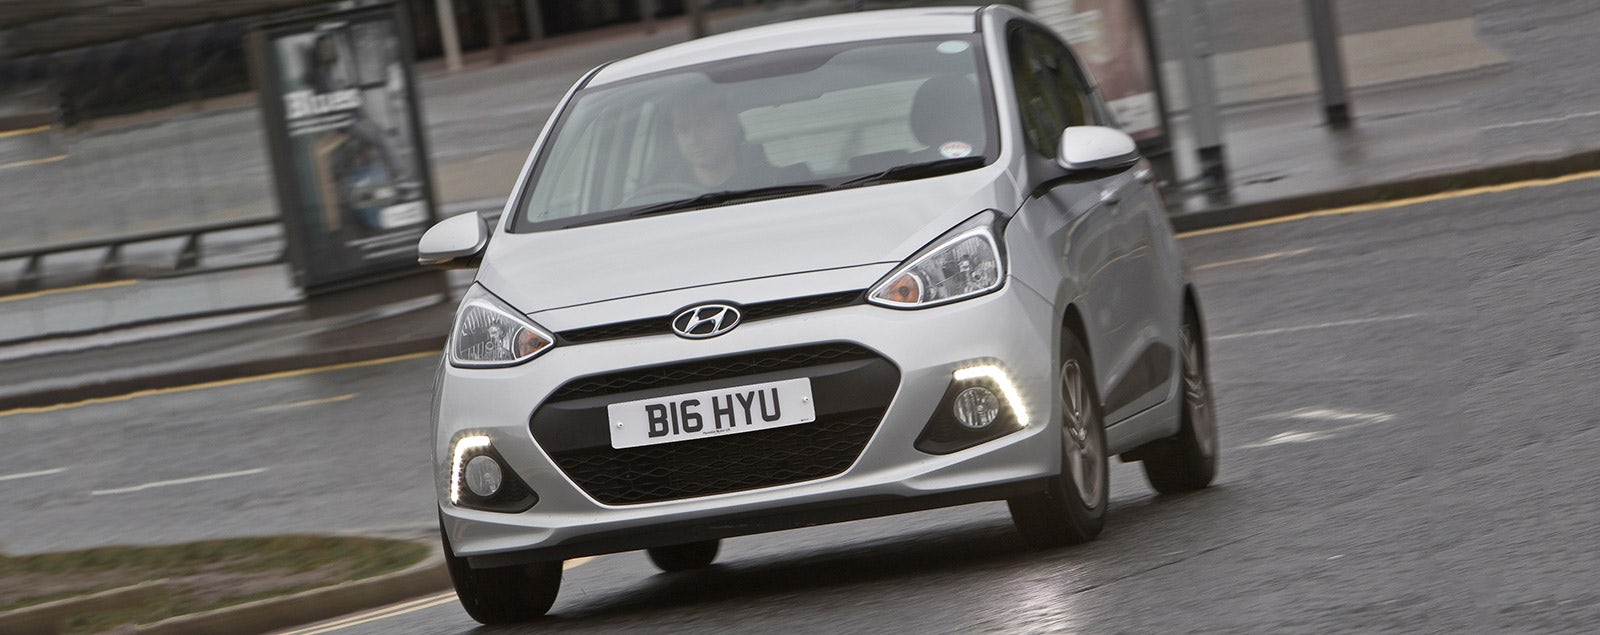 Hyundai i10 dimensions and sizes guide  carwow